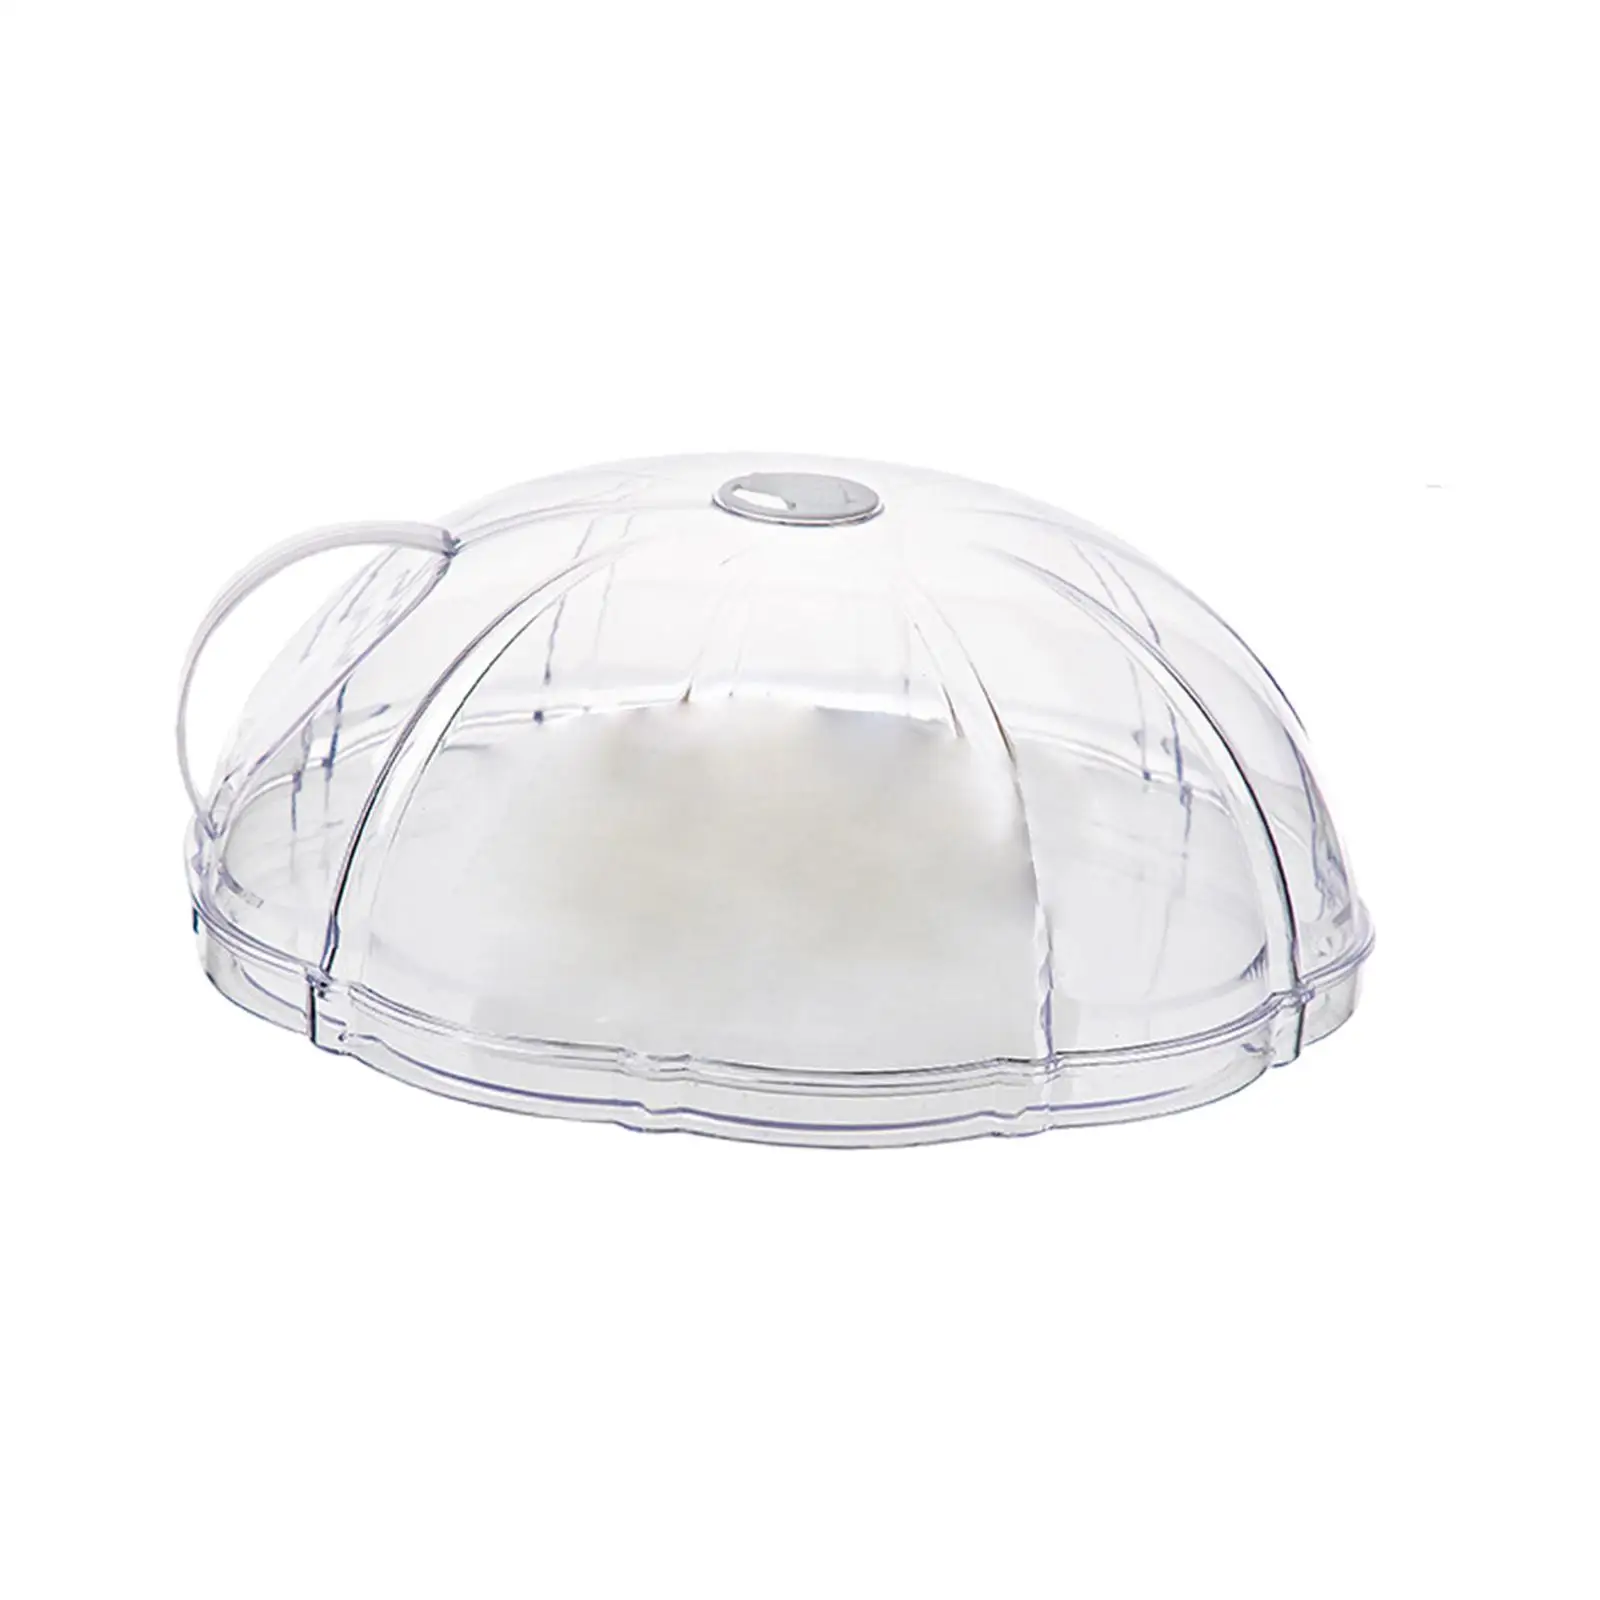 Food Splatter Cover Multipurpose Reusable Kitchen Gadgets with Steam Vents Clear Food Lid for Bakery Party Bread Hot Dishes